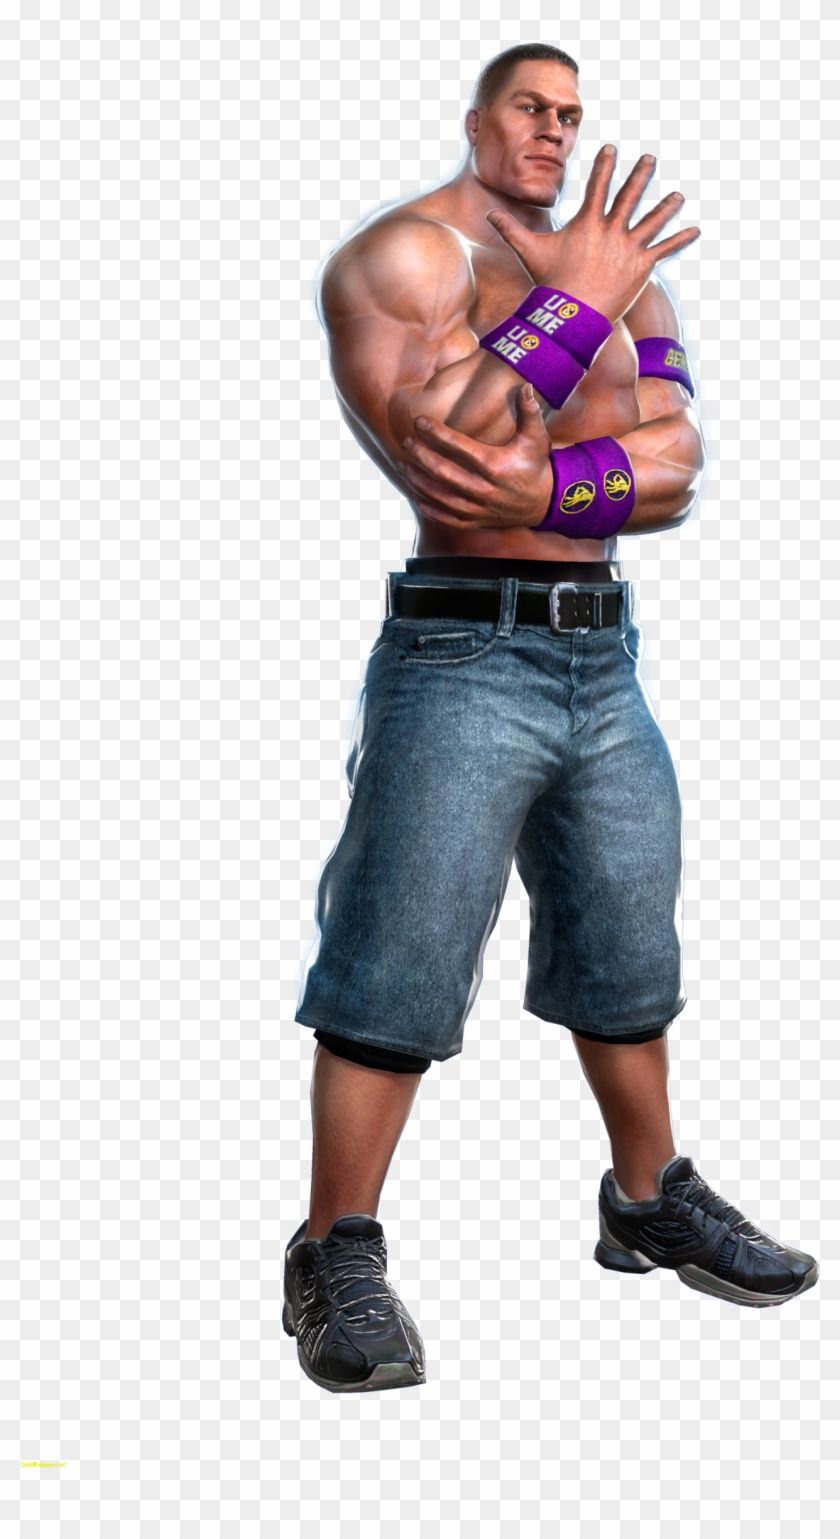 John Cena Image Awesome John Cena Wwe All Stars Wiki All Stars (3Ds) Transparent PNG Clipart Image Download